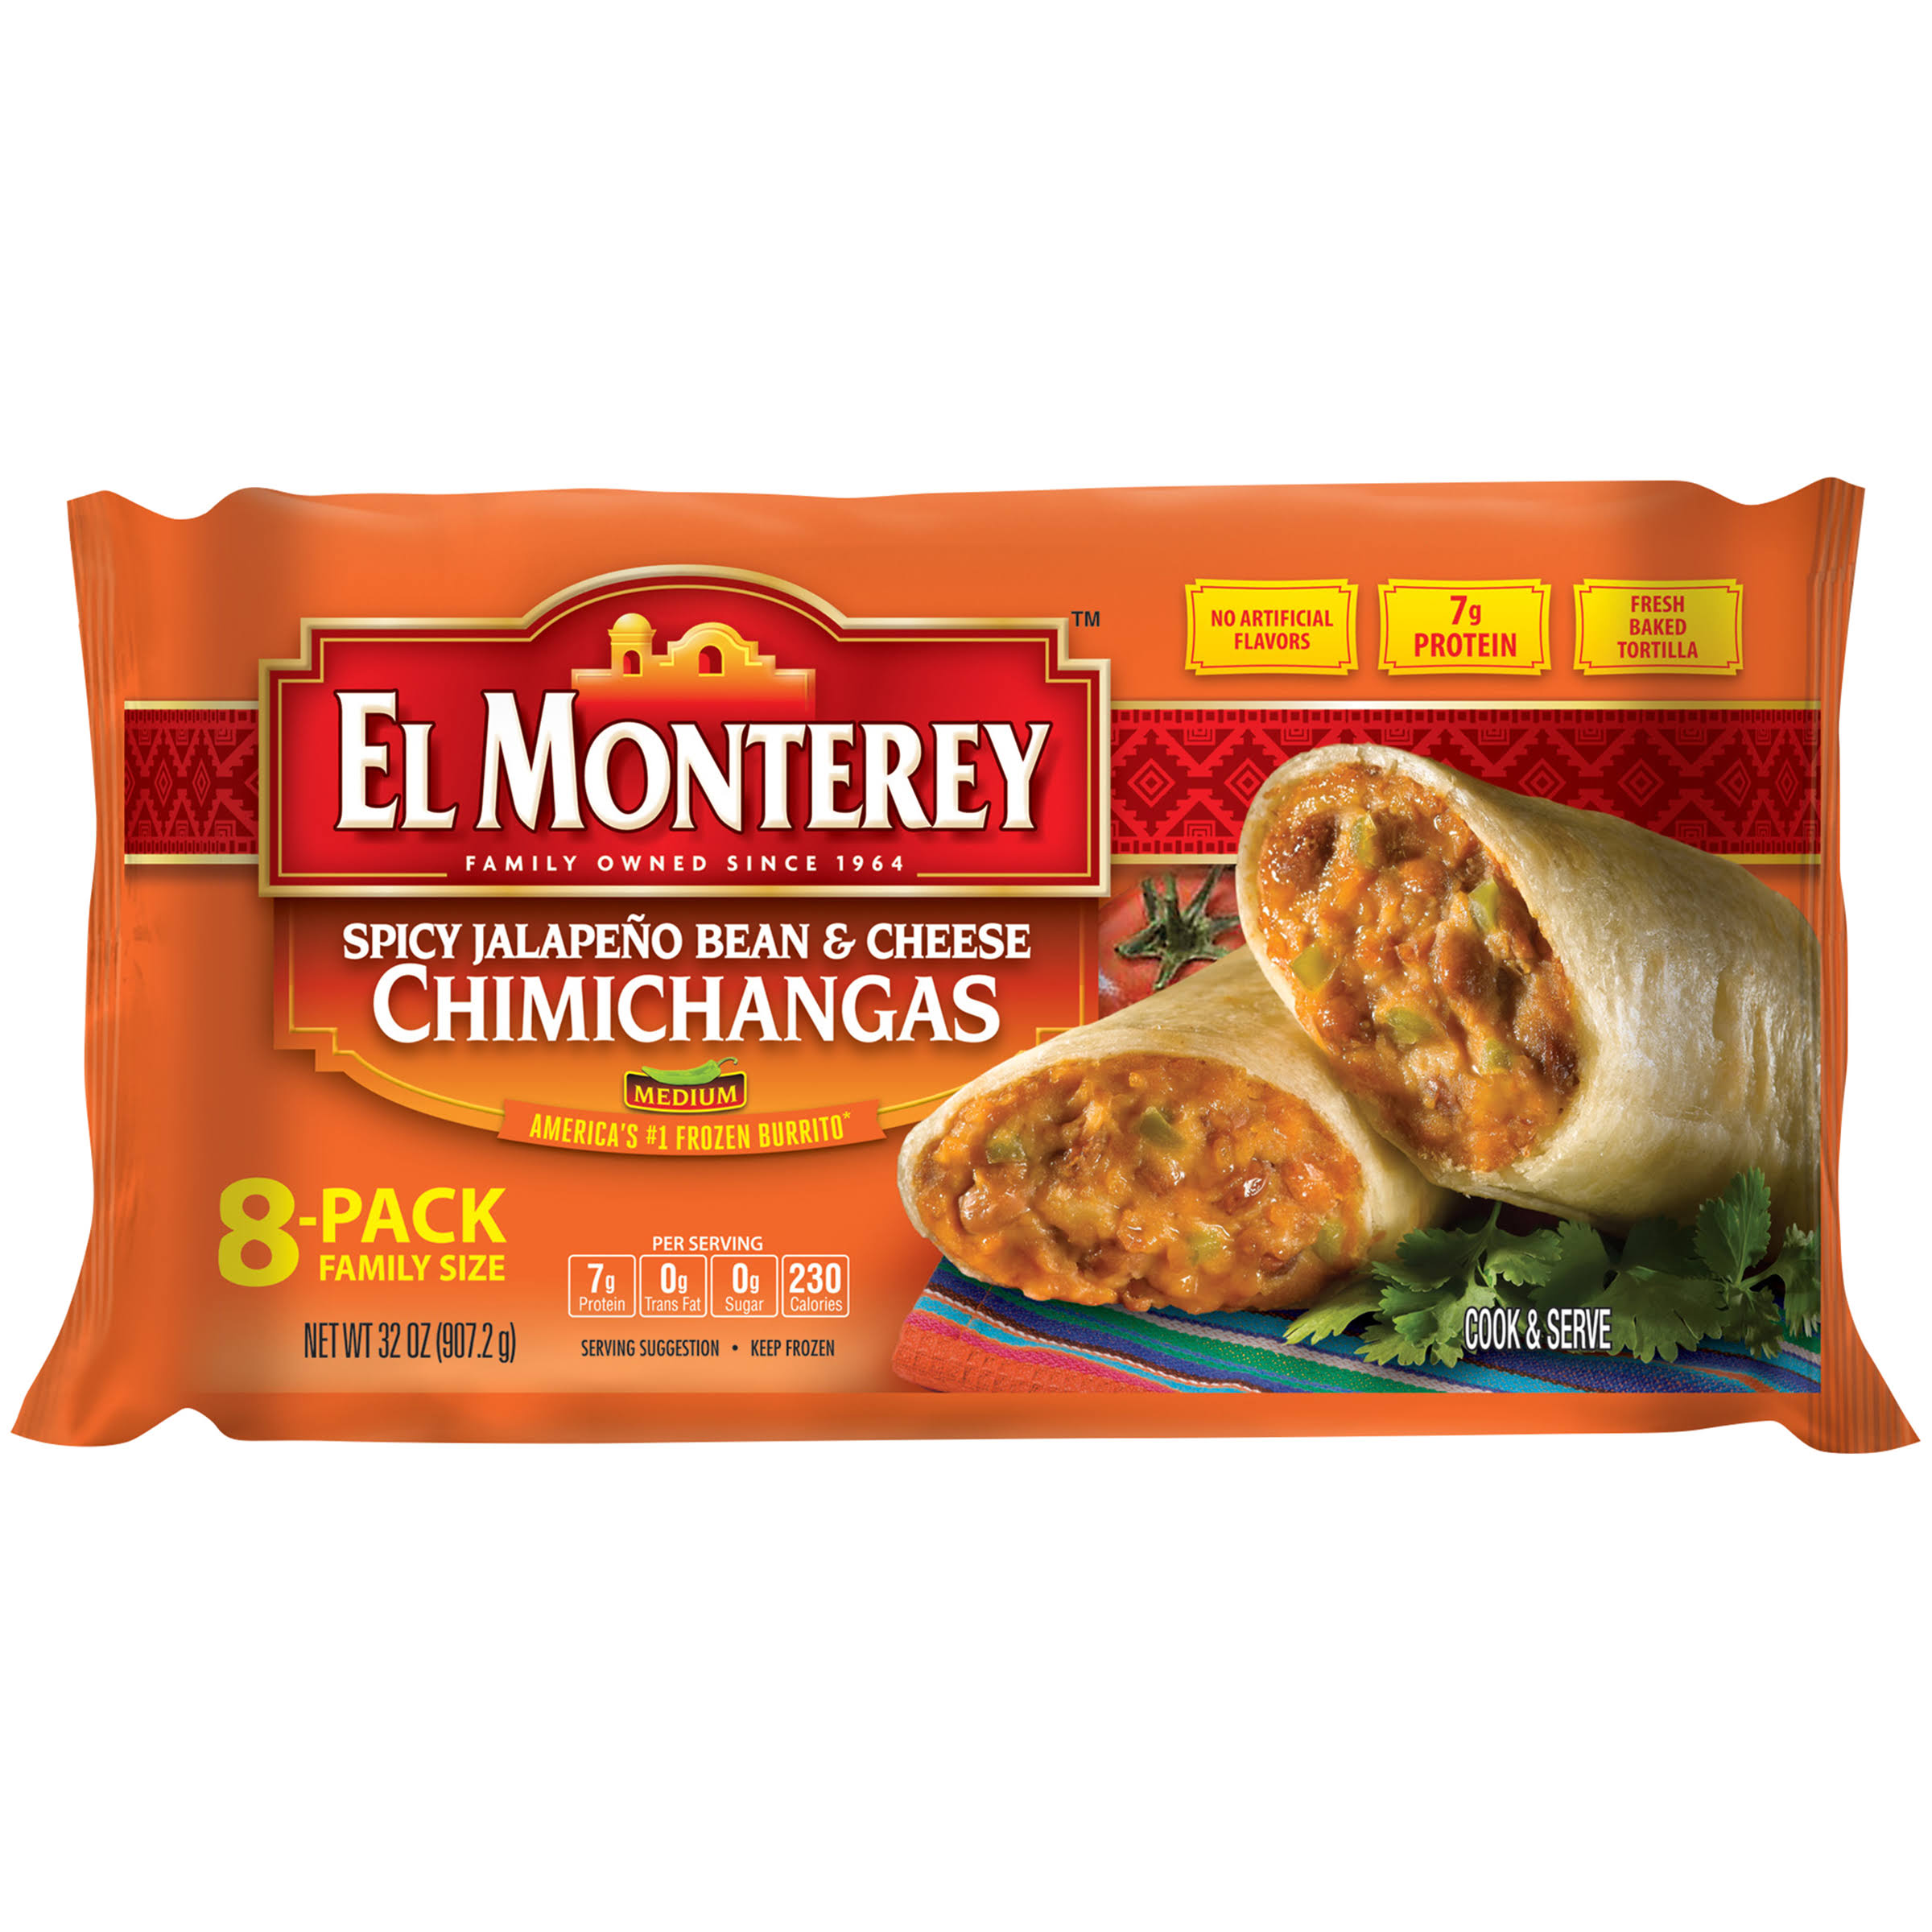 El Monterey Chimichangas, Spicy Jalapeno Bean & Cheese, Medium, Family Size, 8 Pack - 8 pack, 30.4 oz